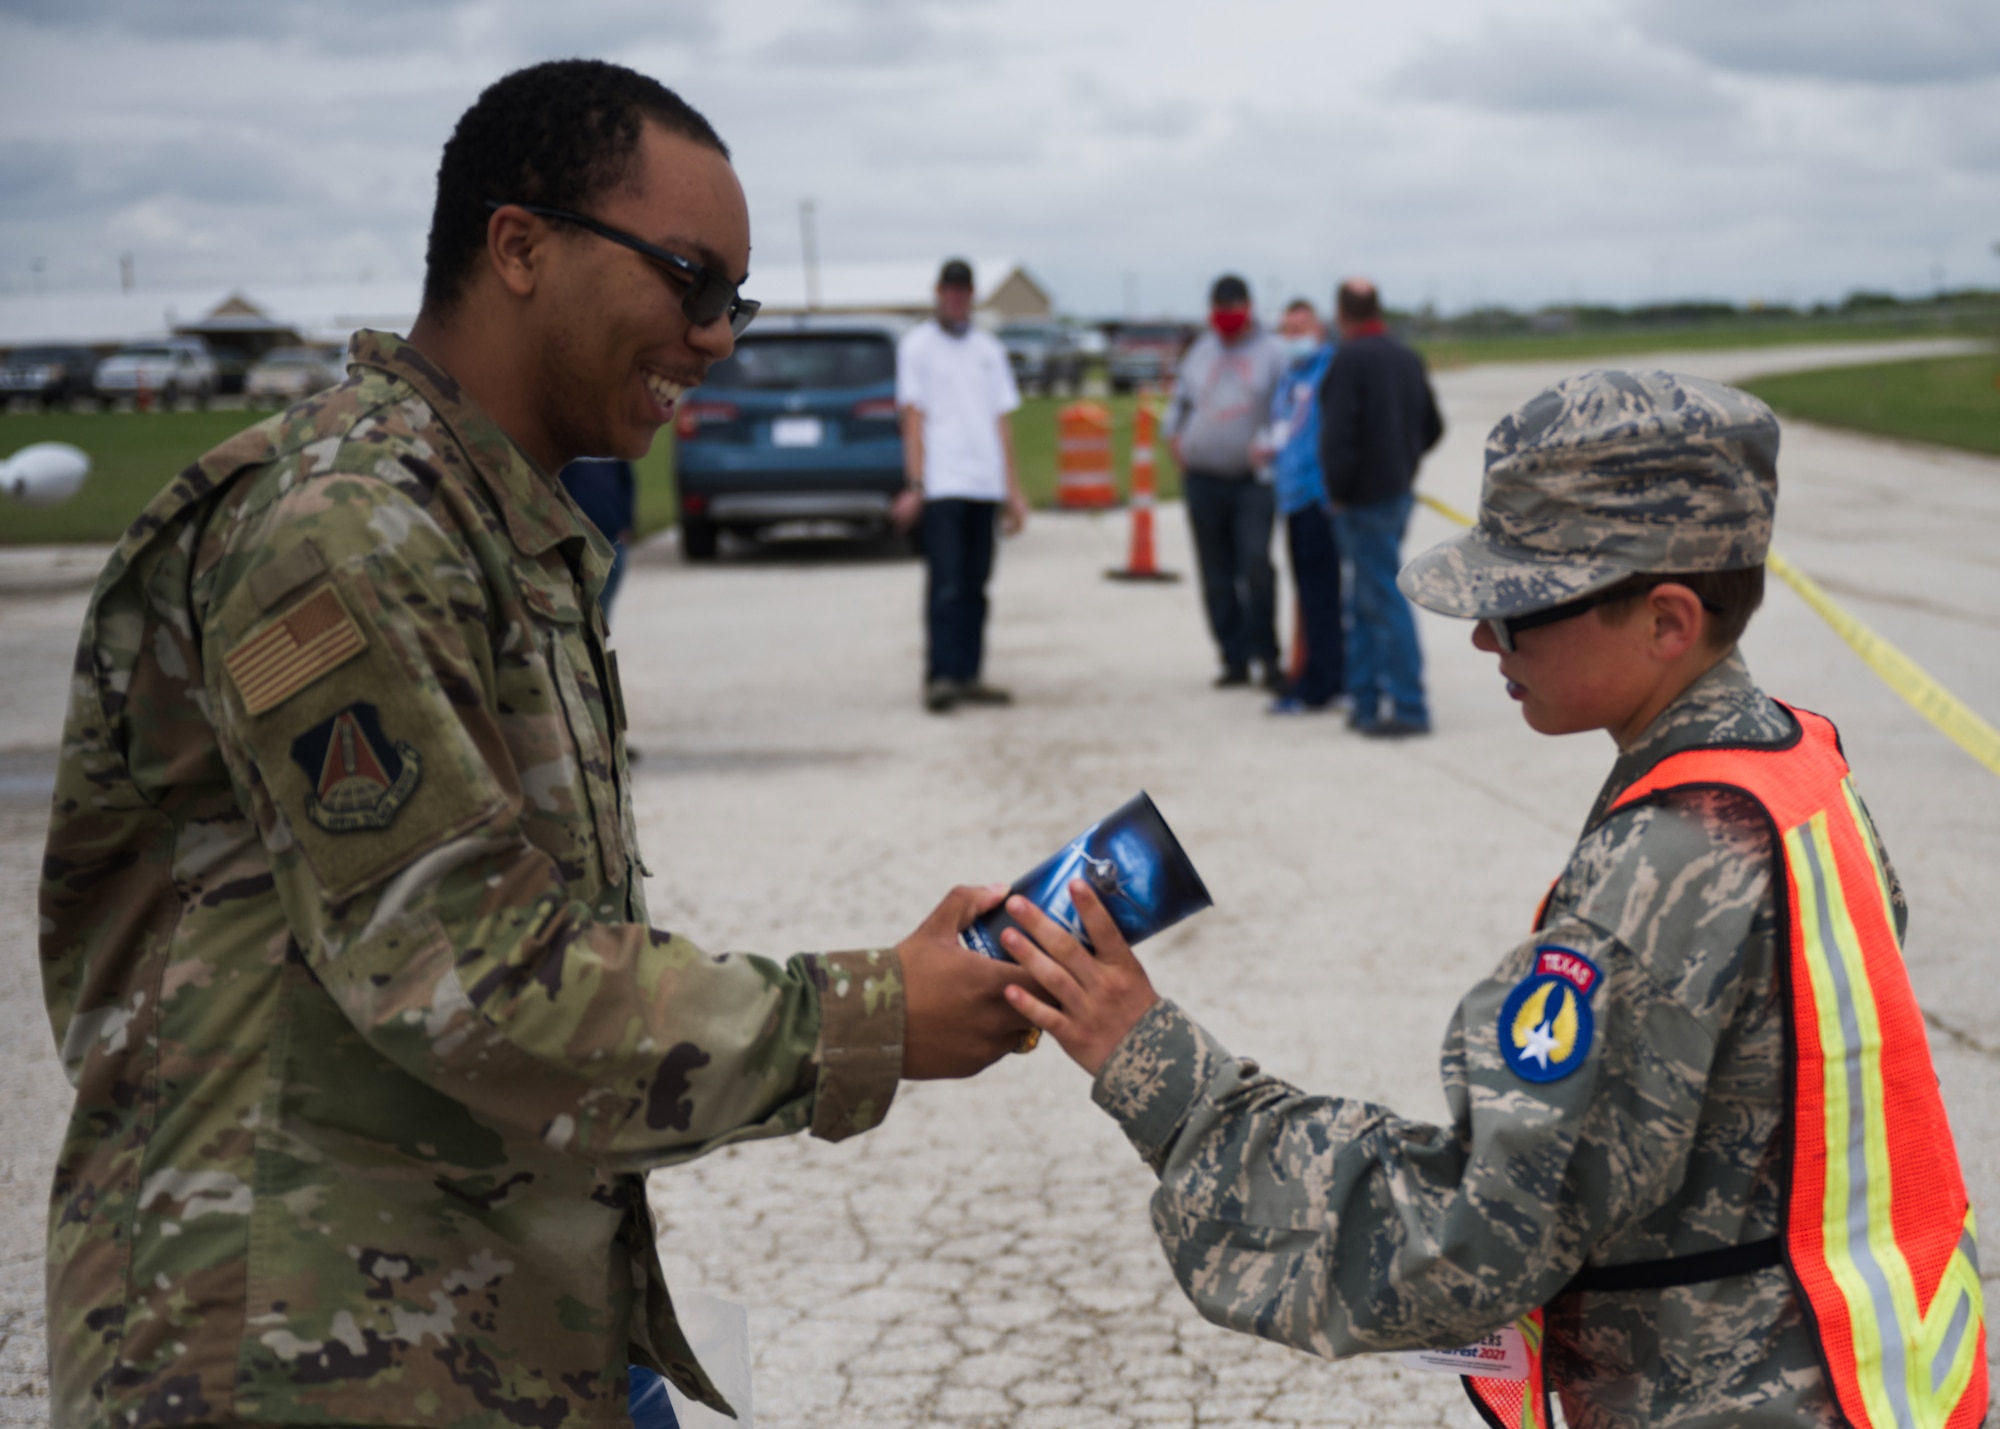 Photo of Airman handing out recruiting items.